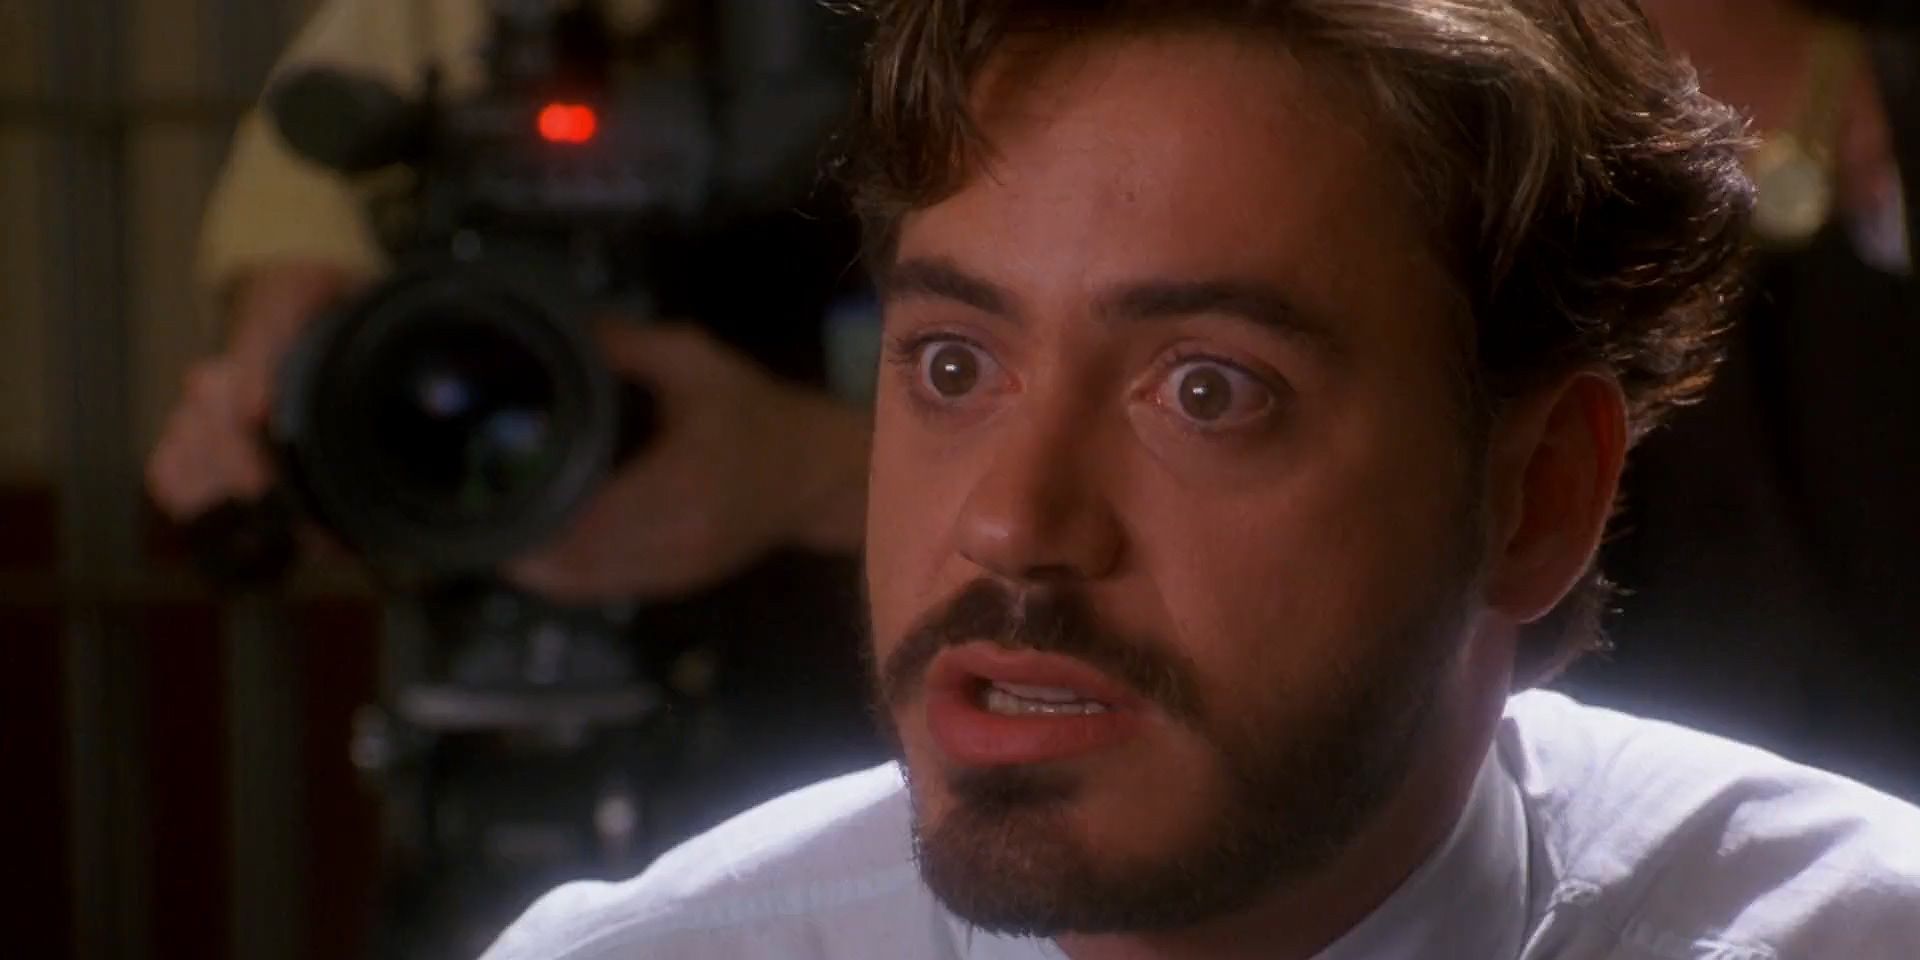 Robert Downey Jr in Natural Born Killers with an intense look on his face